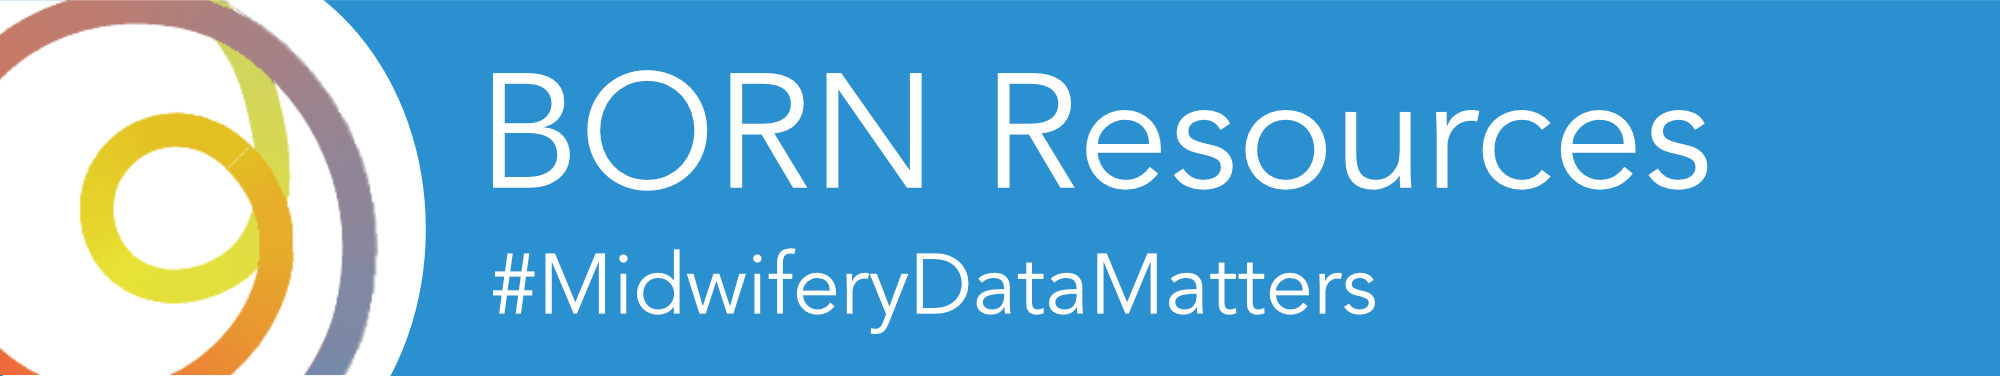 A-O-M swirl logo with text on blue background" BORN Resources hashtag midwifery data matters"